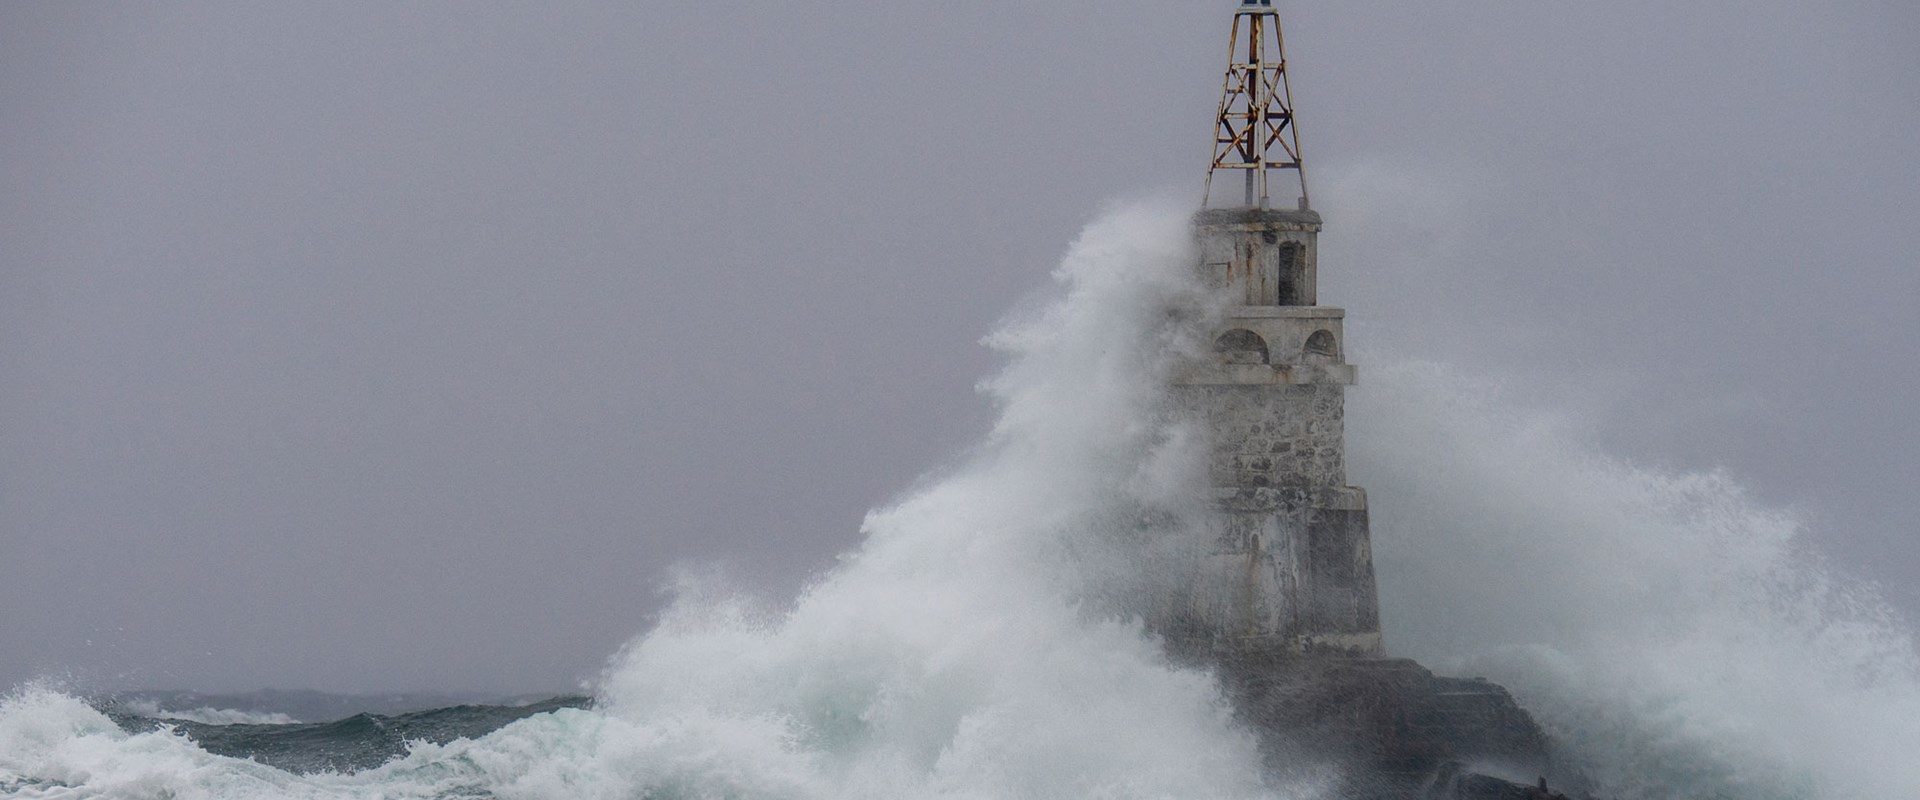 Storm in a port, big wave hitting a lighthouse 